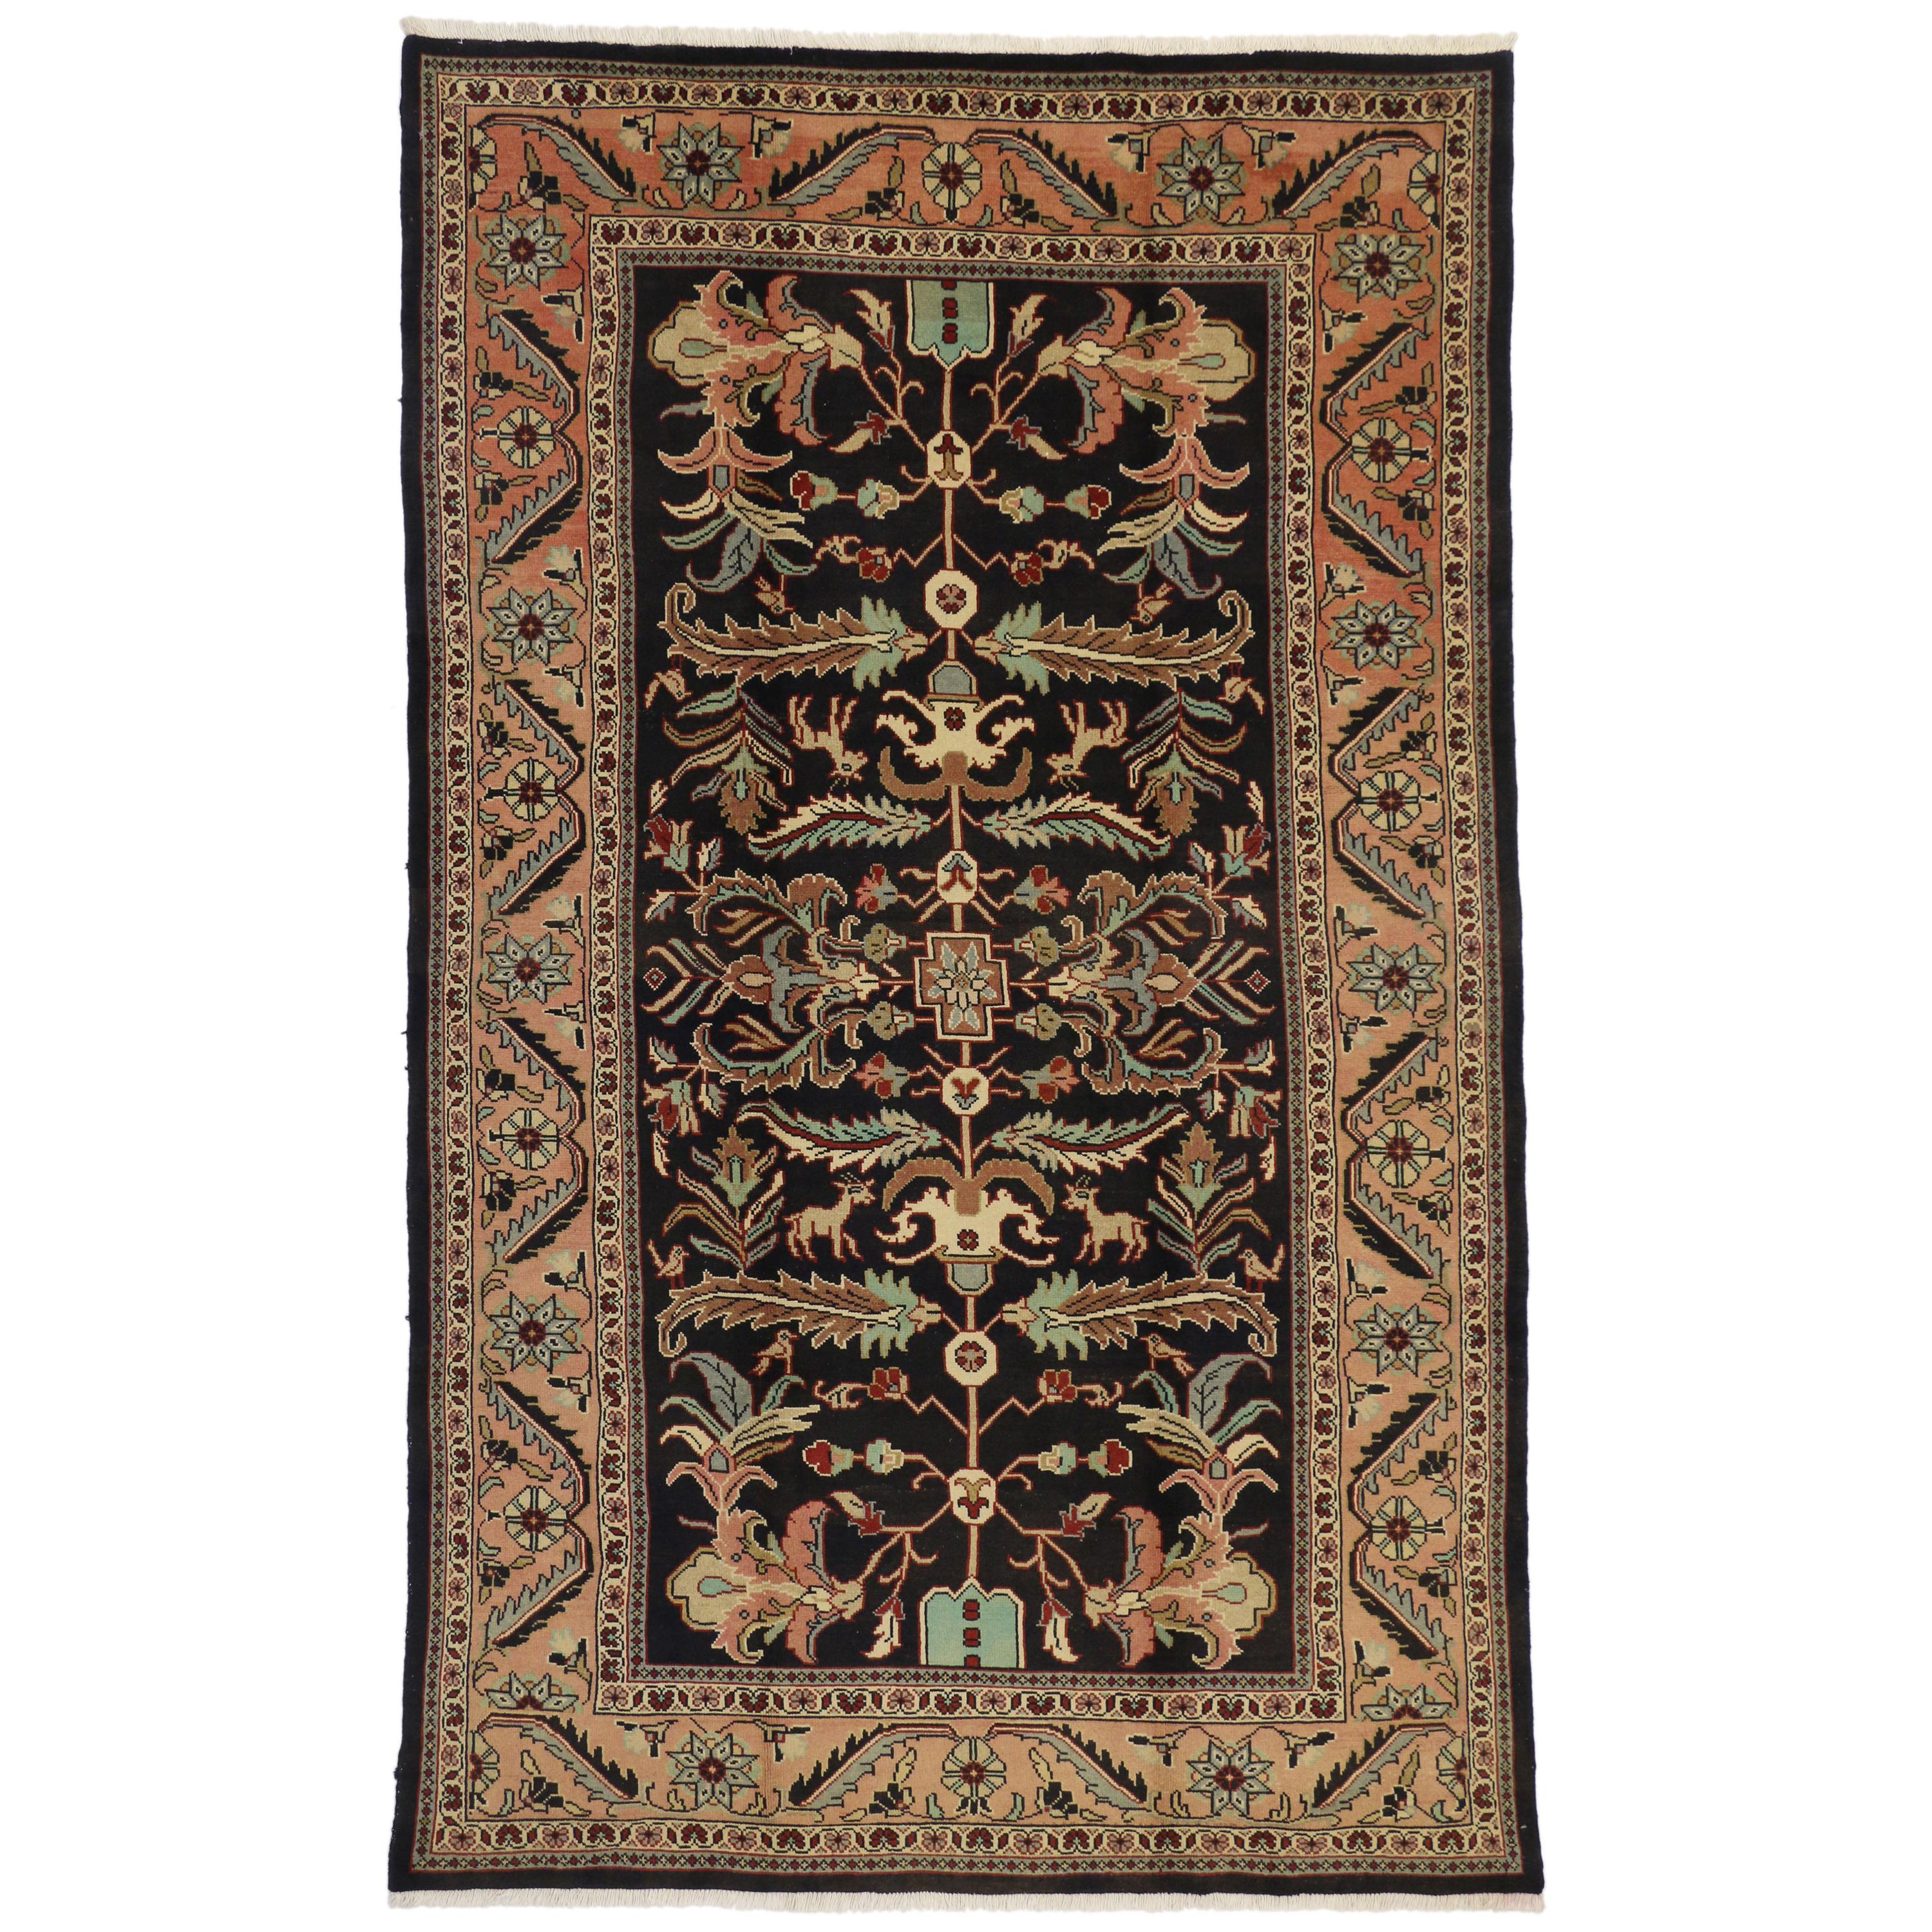 Vintage Persian Mahal William Morris Inspired Rug with Arts & Crafts Style